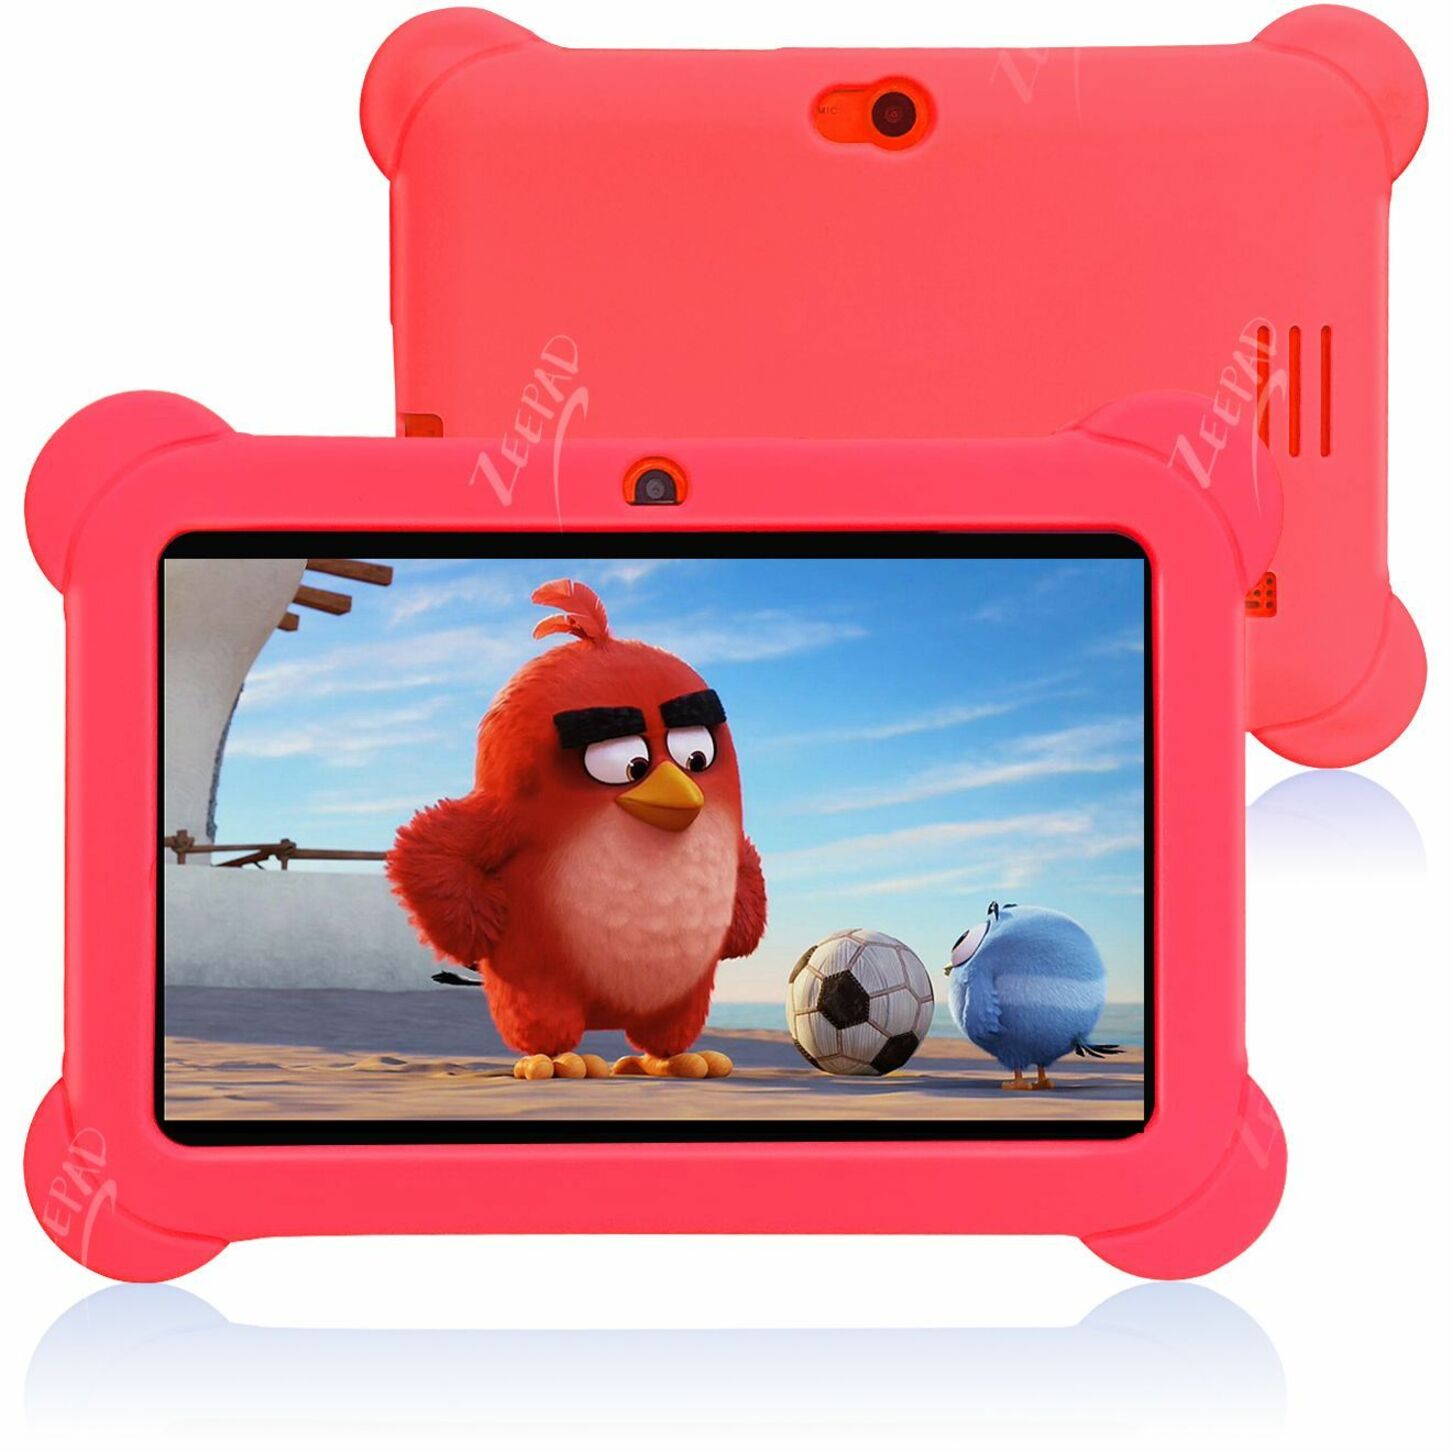 7inch Kids Android Tablet 16GB Hard Drive 1GB RAM Wi-Fi Camera Bluetooth  Play Store Apps Games with Keyboard-Red, hard games for android 